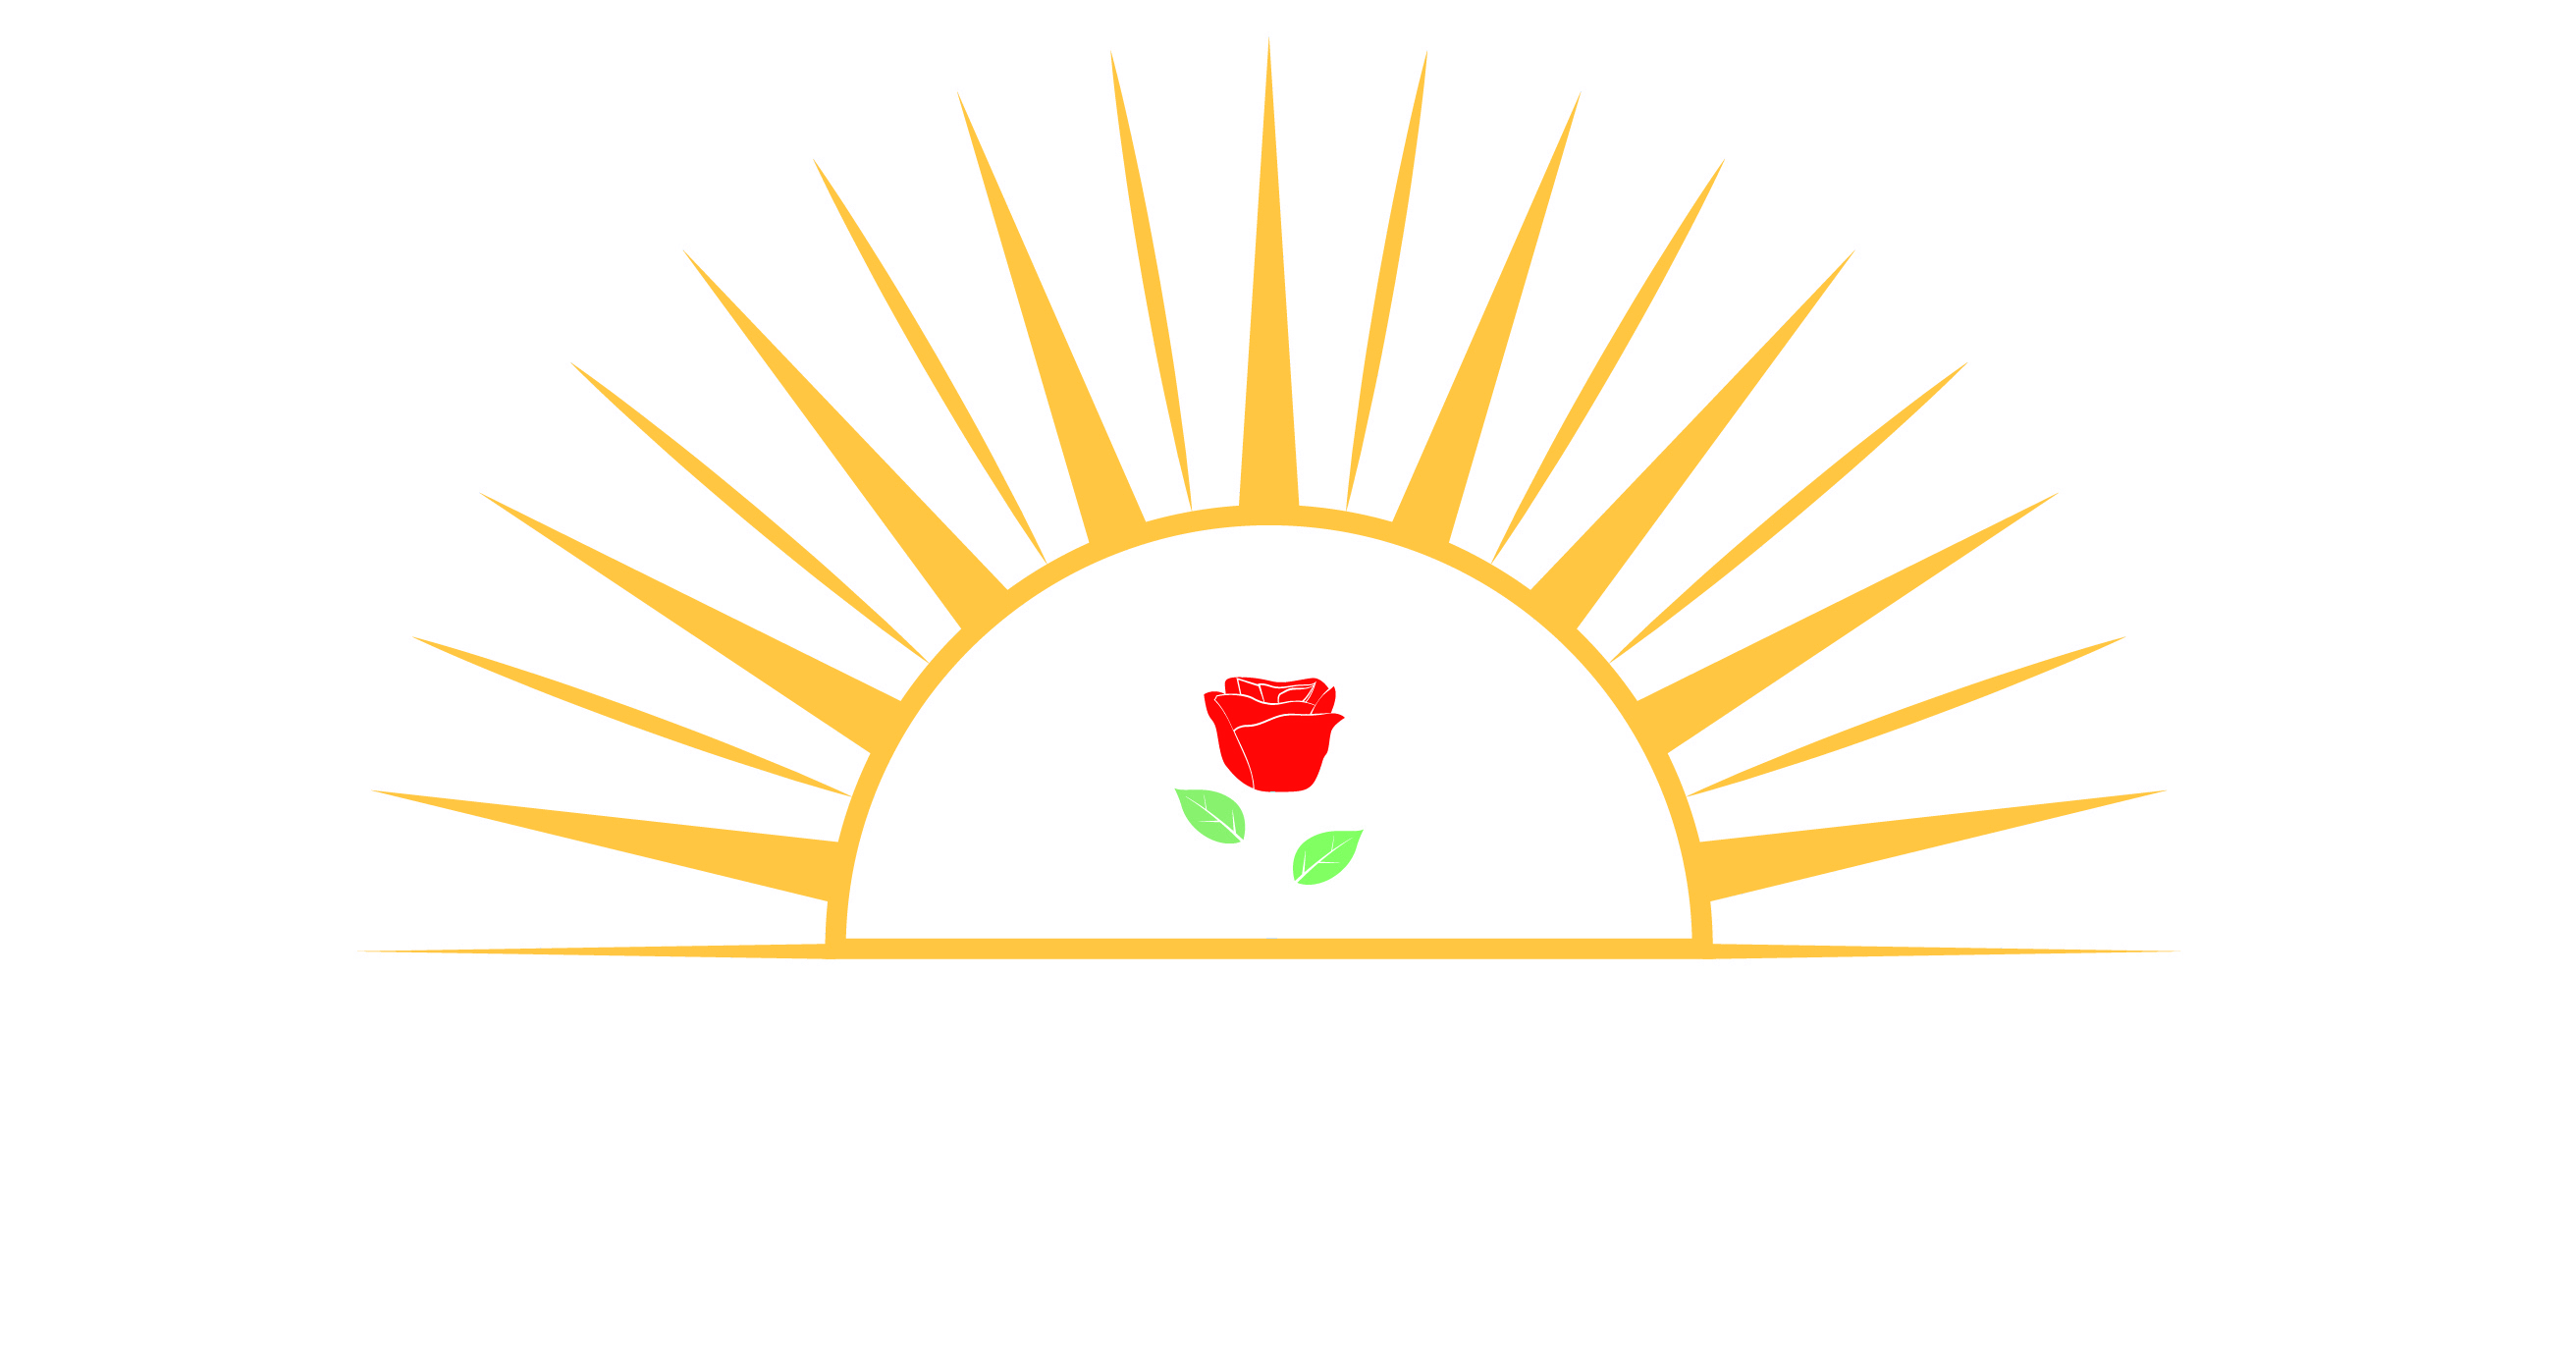 MSM Bright Suns Logo - small heading version displayed in inverse.